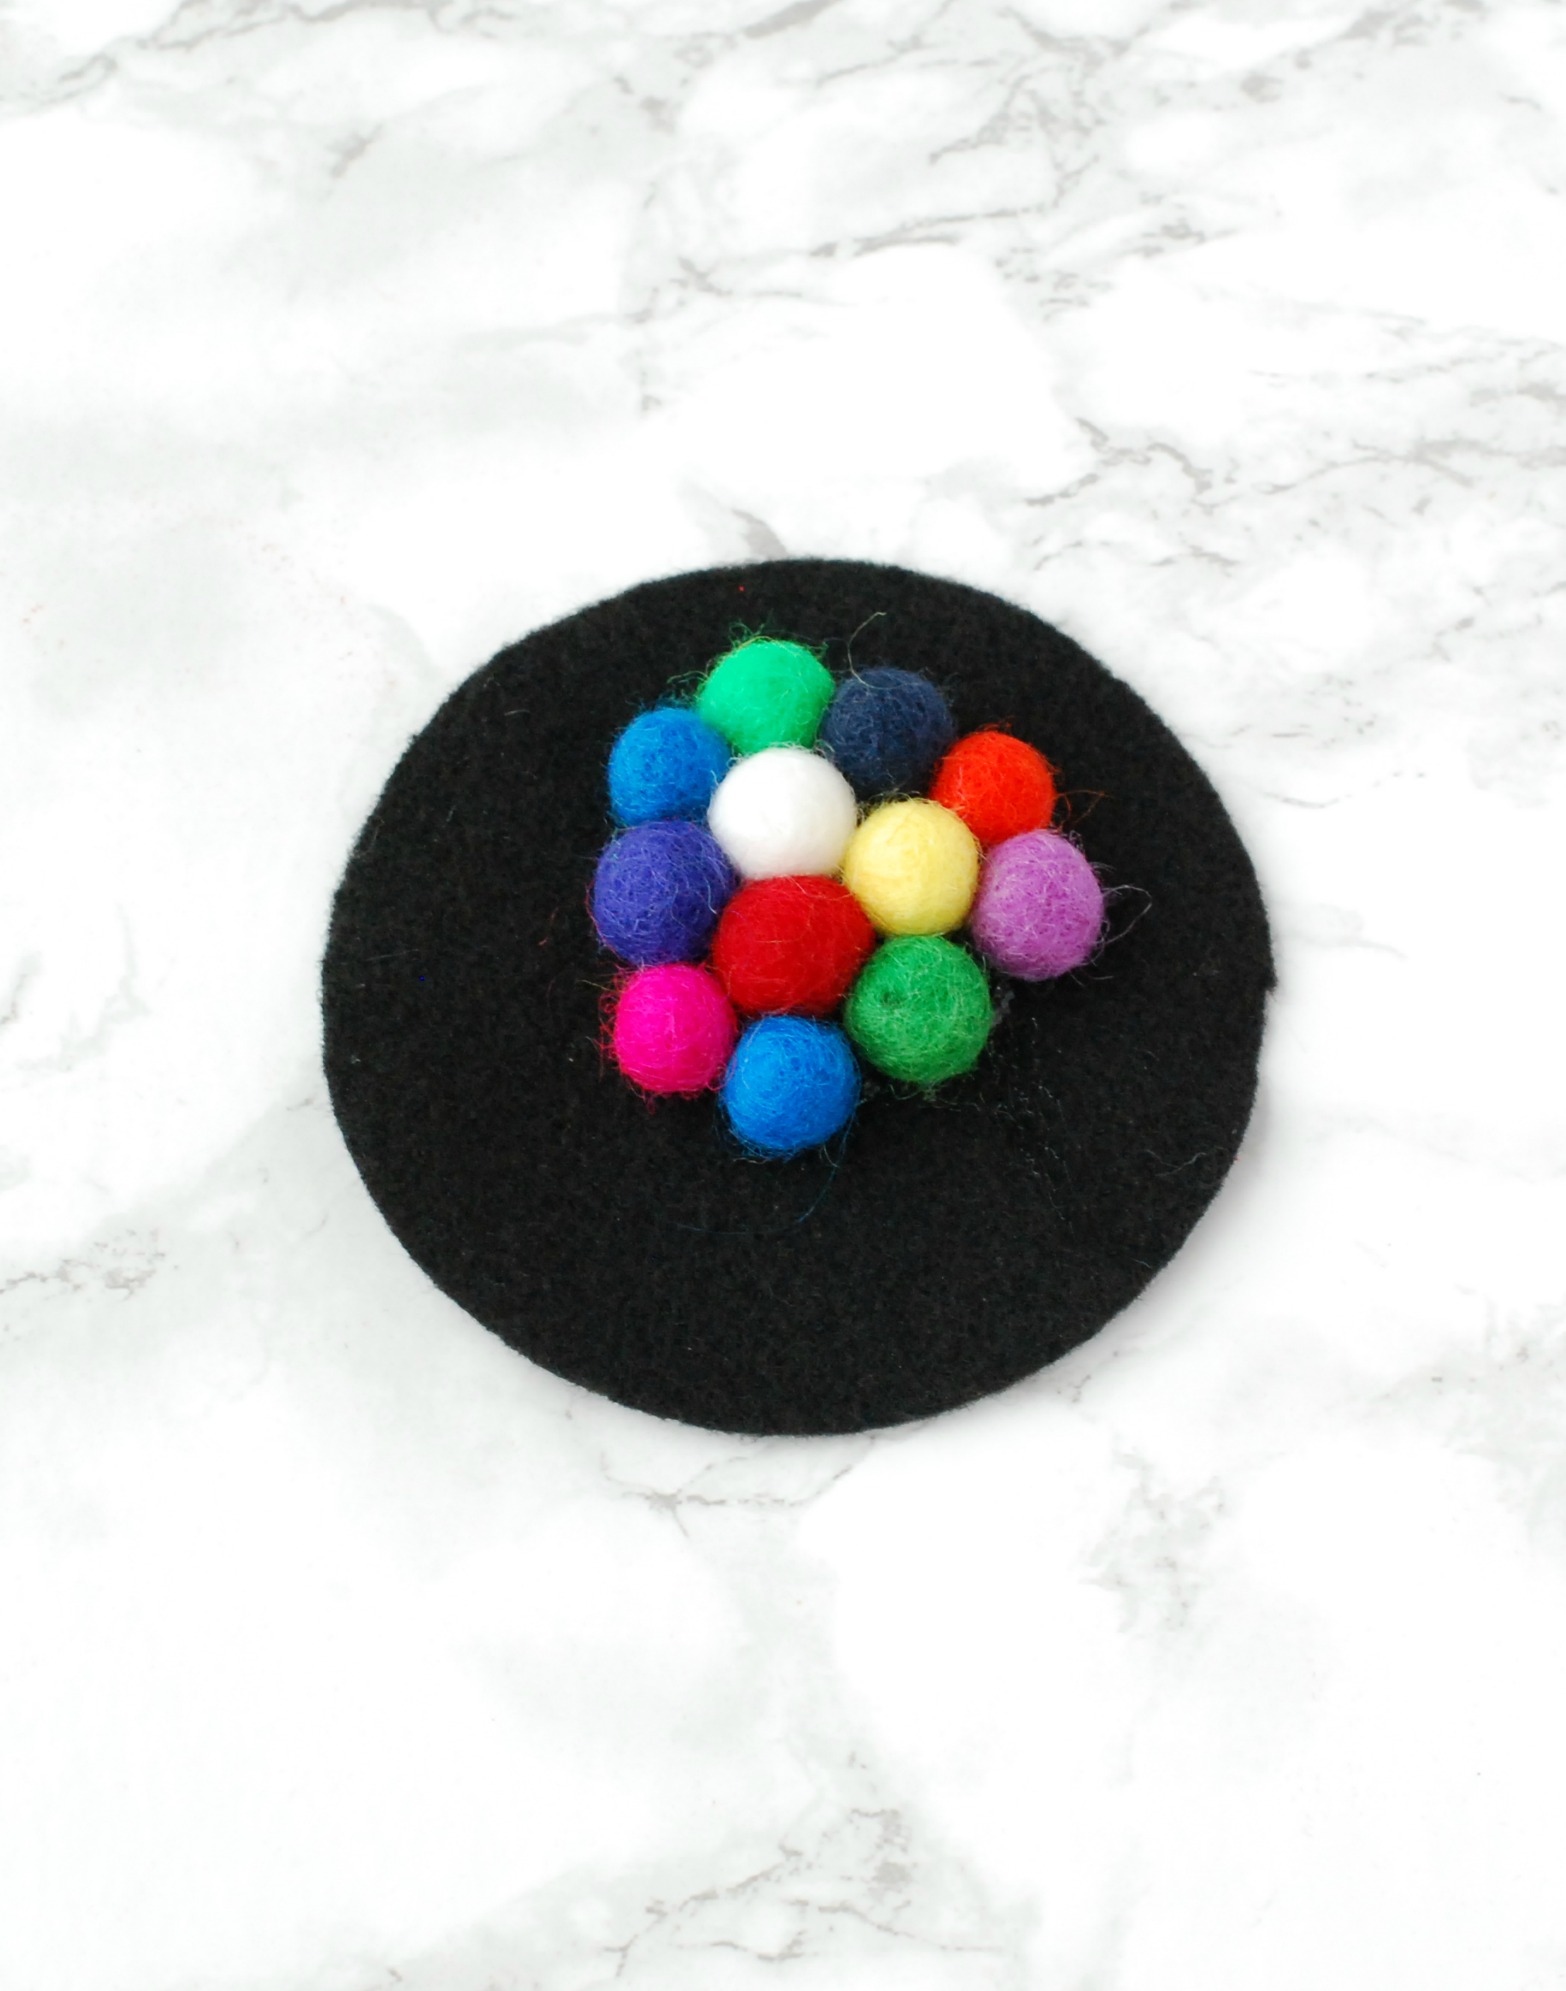 Felt ball coasters are easy and inexpensive to make, but add such a fun pop of color to your home.